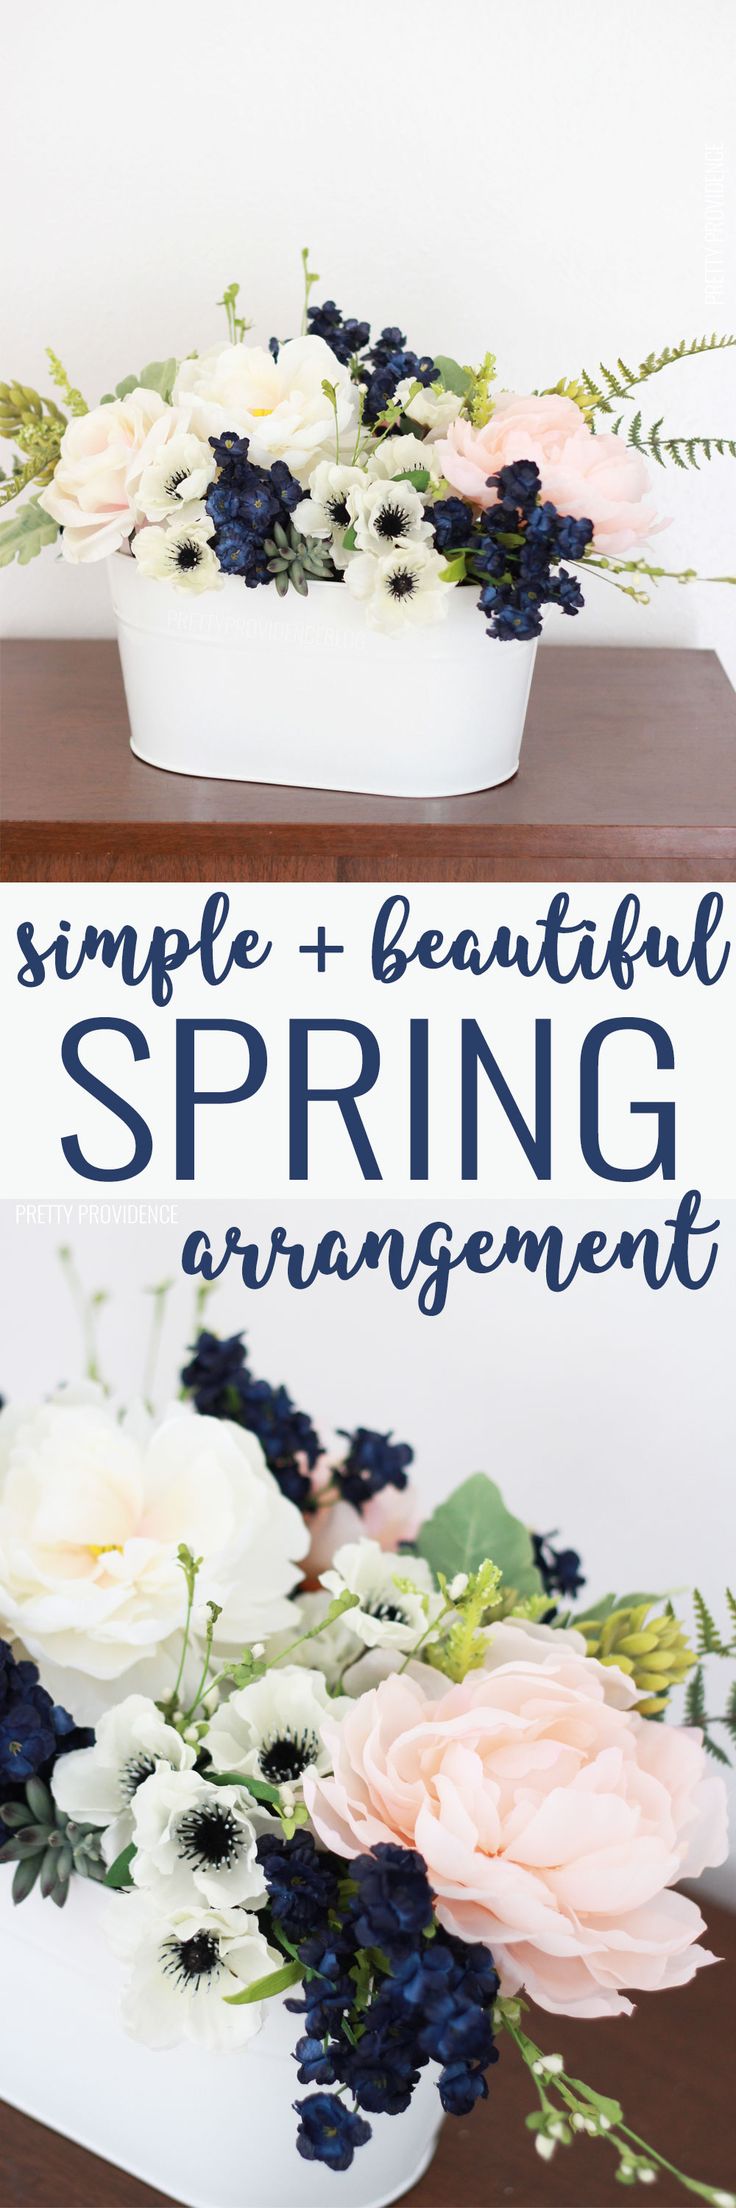 This easy flower arrangement is SO pretty! Perfect light pink and navy color com...